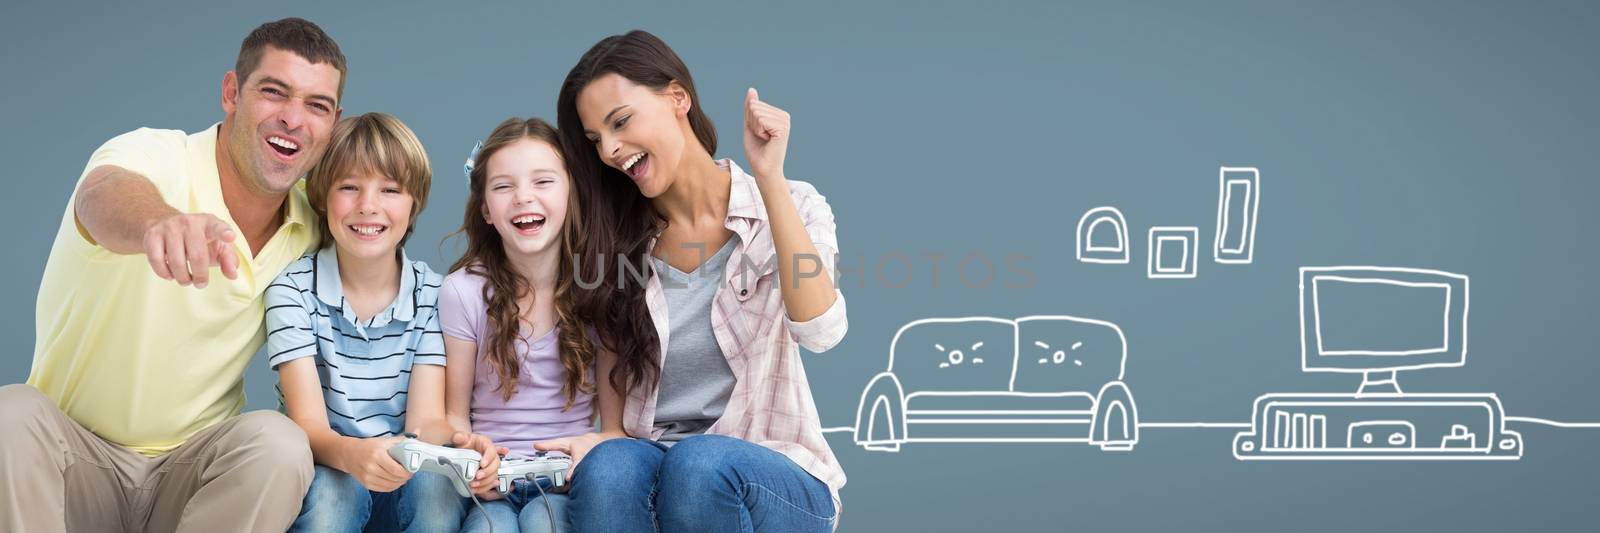 Digital composite of Family having fun together with television and couch drawings